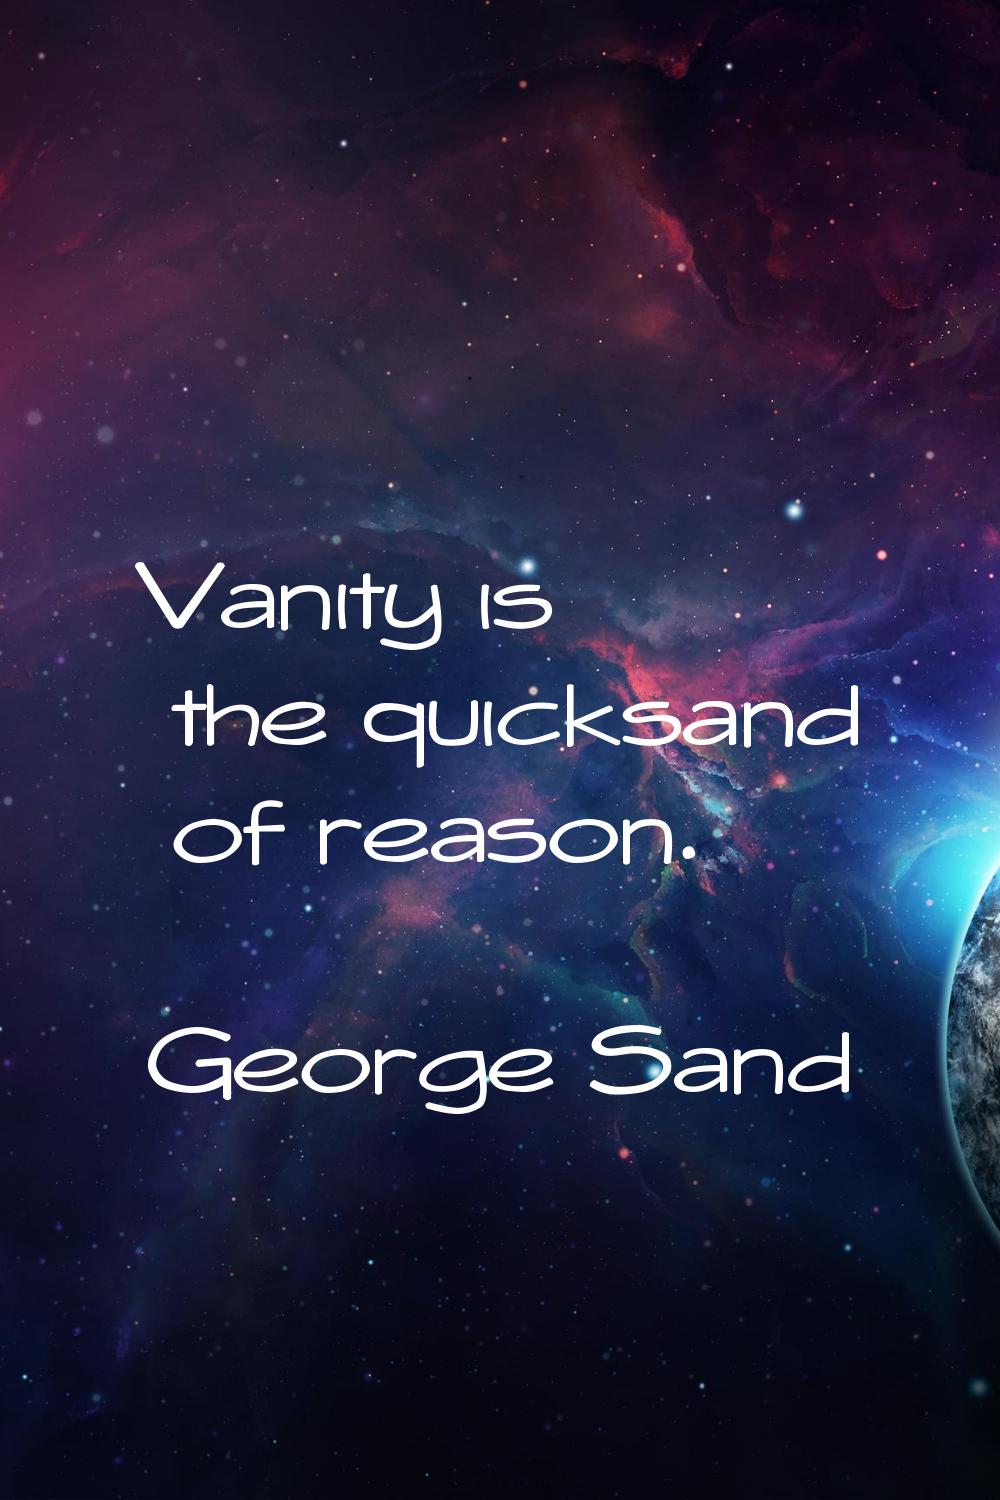 Vanity is the quicksand of reason.